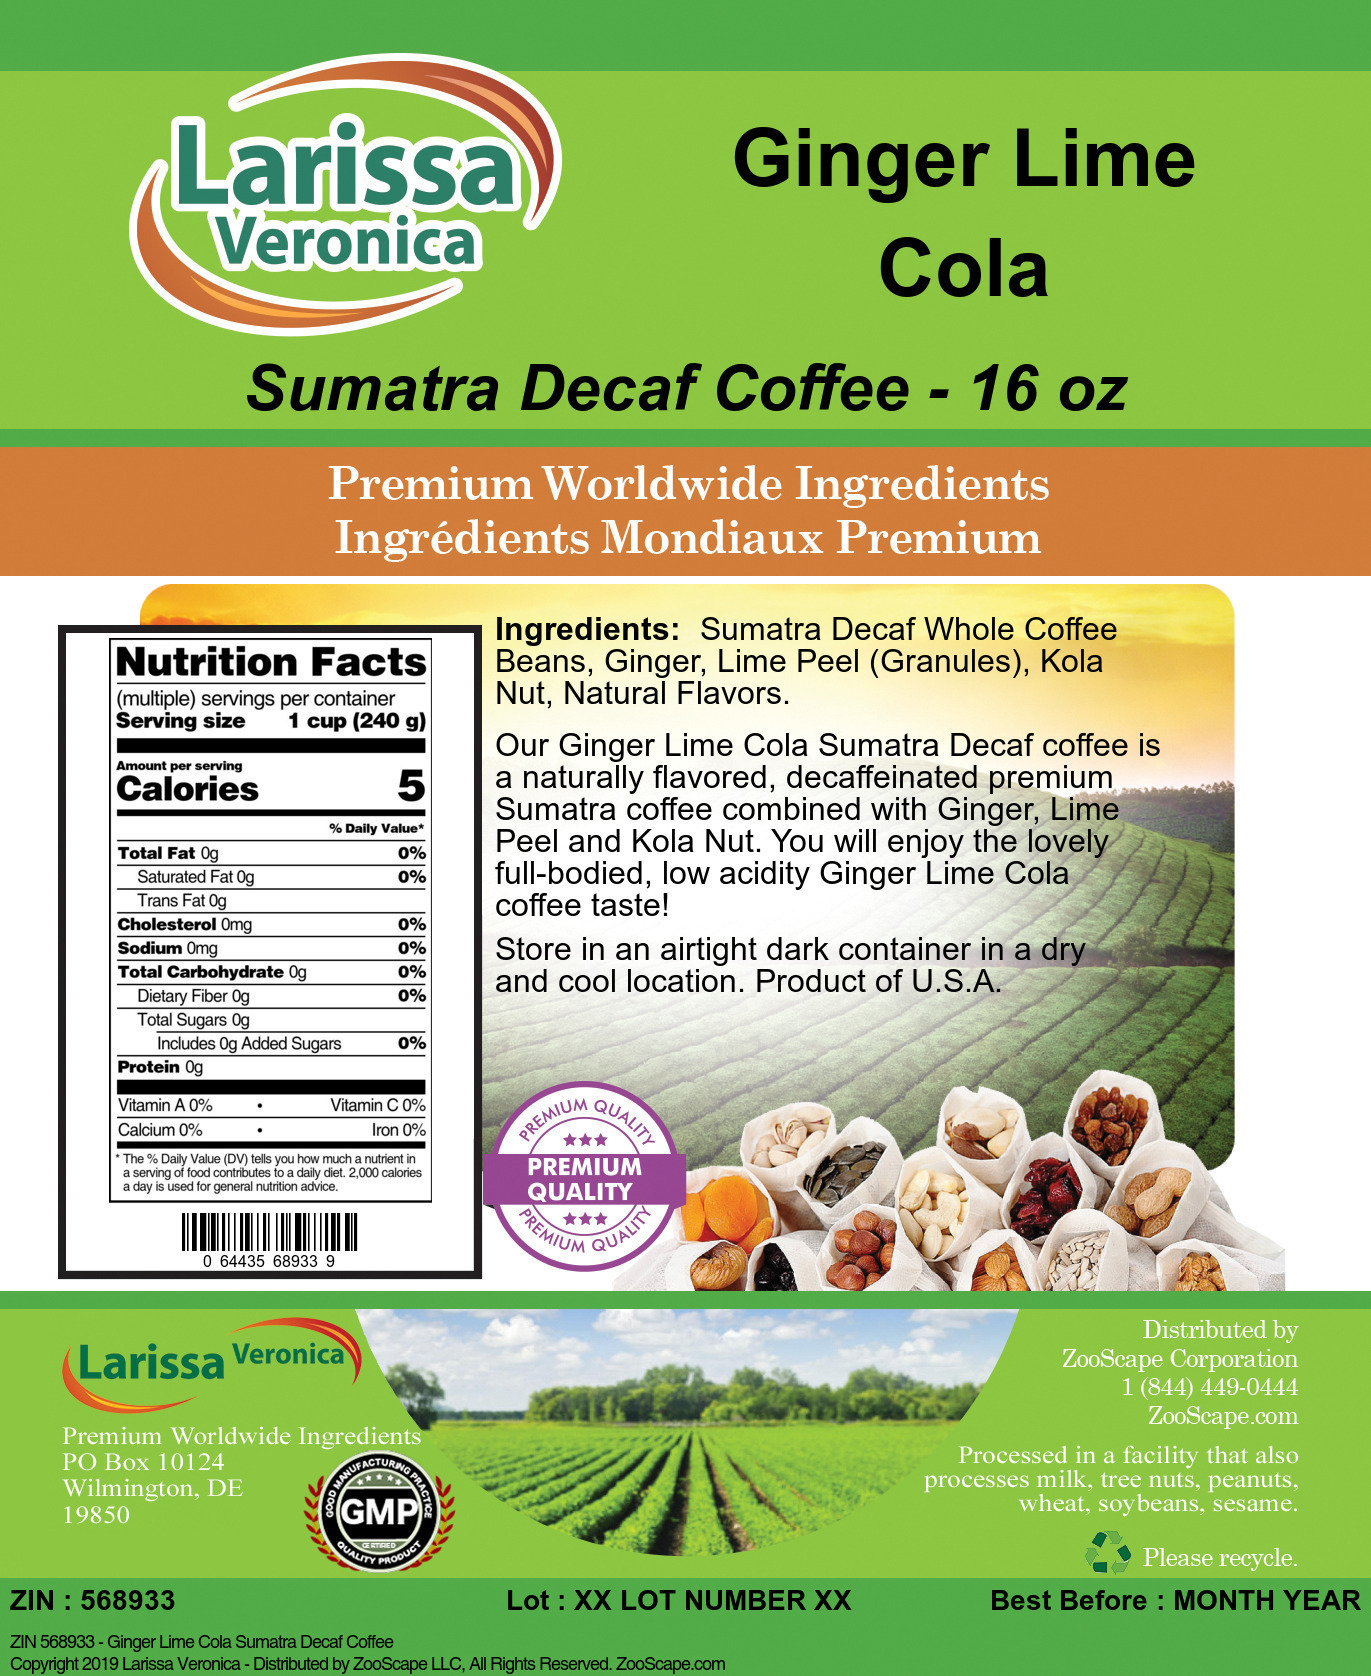 Ginger Lime Cola Sumatra Decaf Coffee - Label